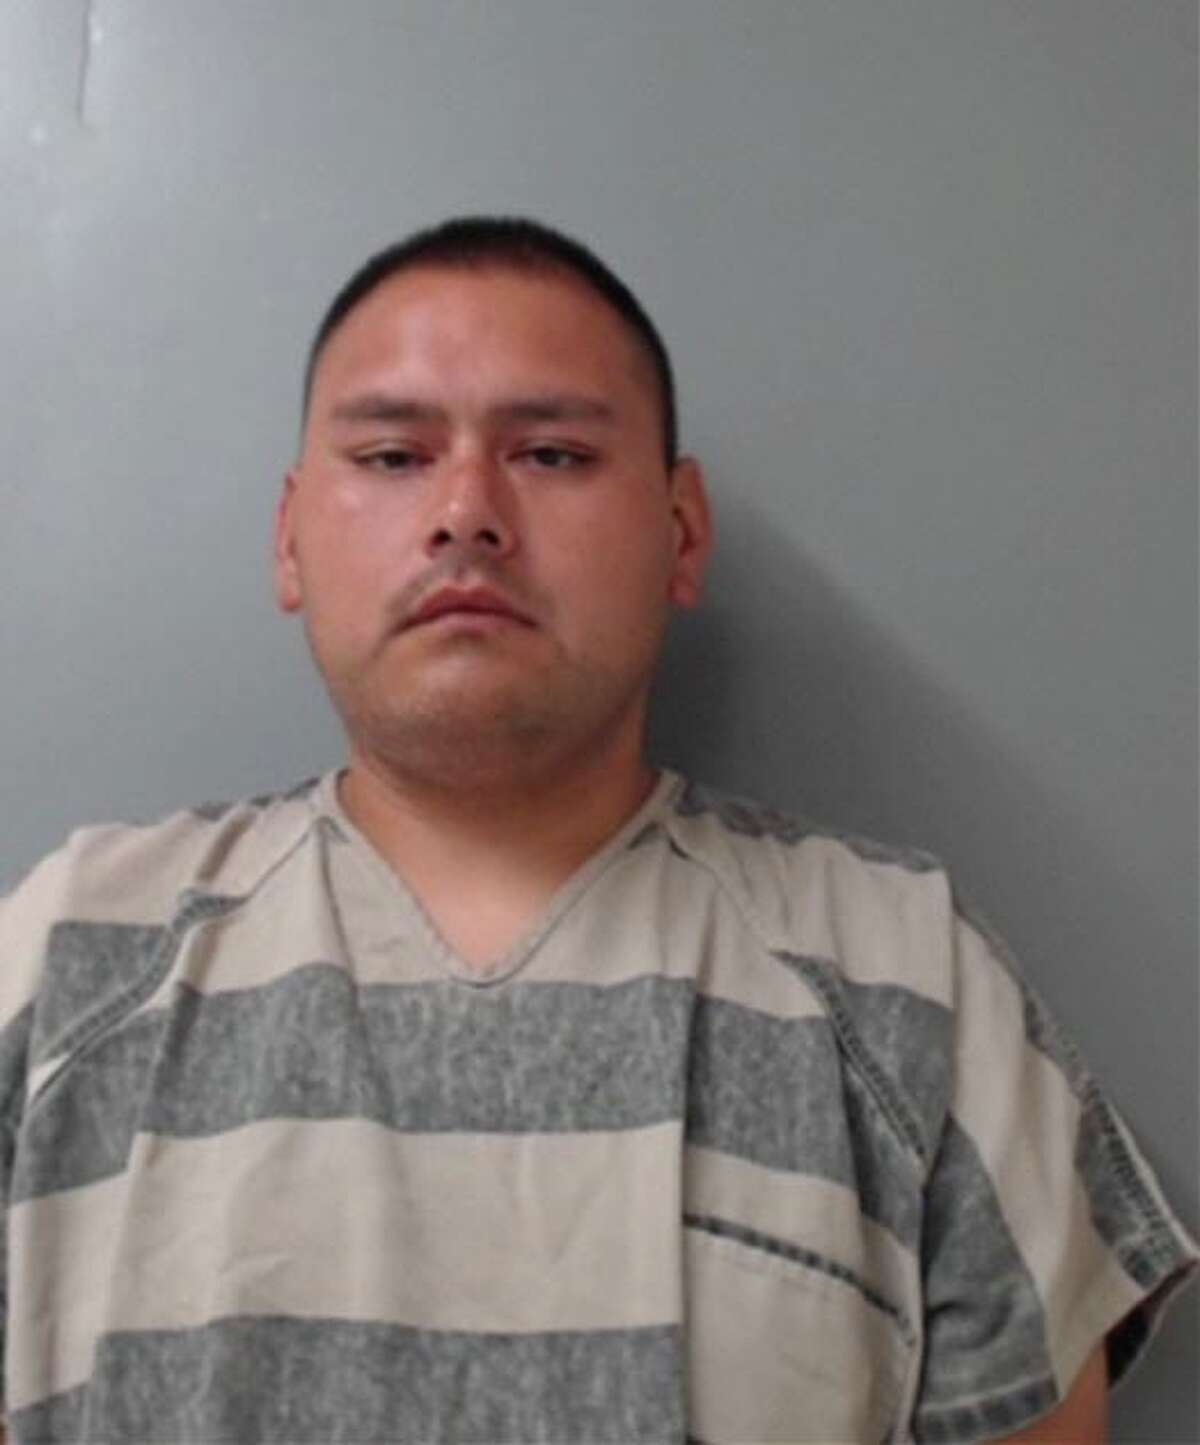 Rolando Salinas, 32, was charged with aggravated assault with a deadly weapon and criminal mischief.